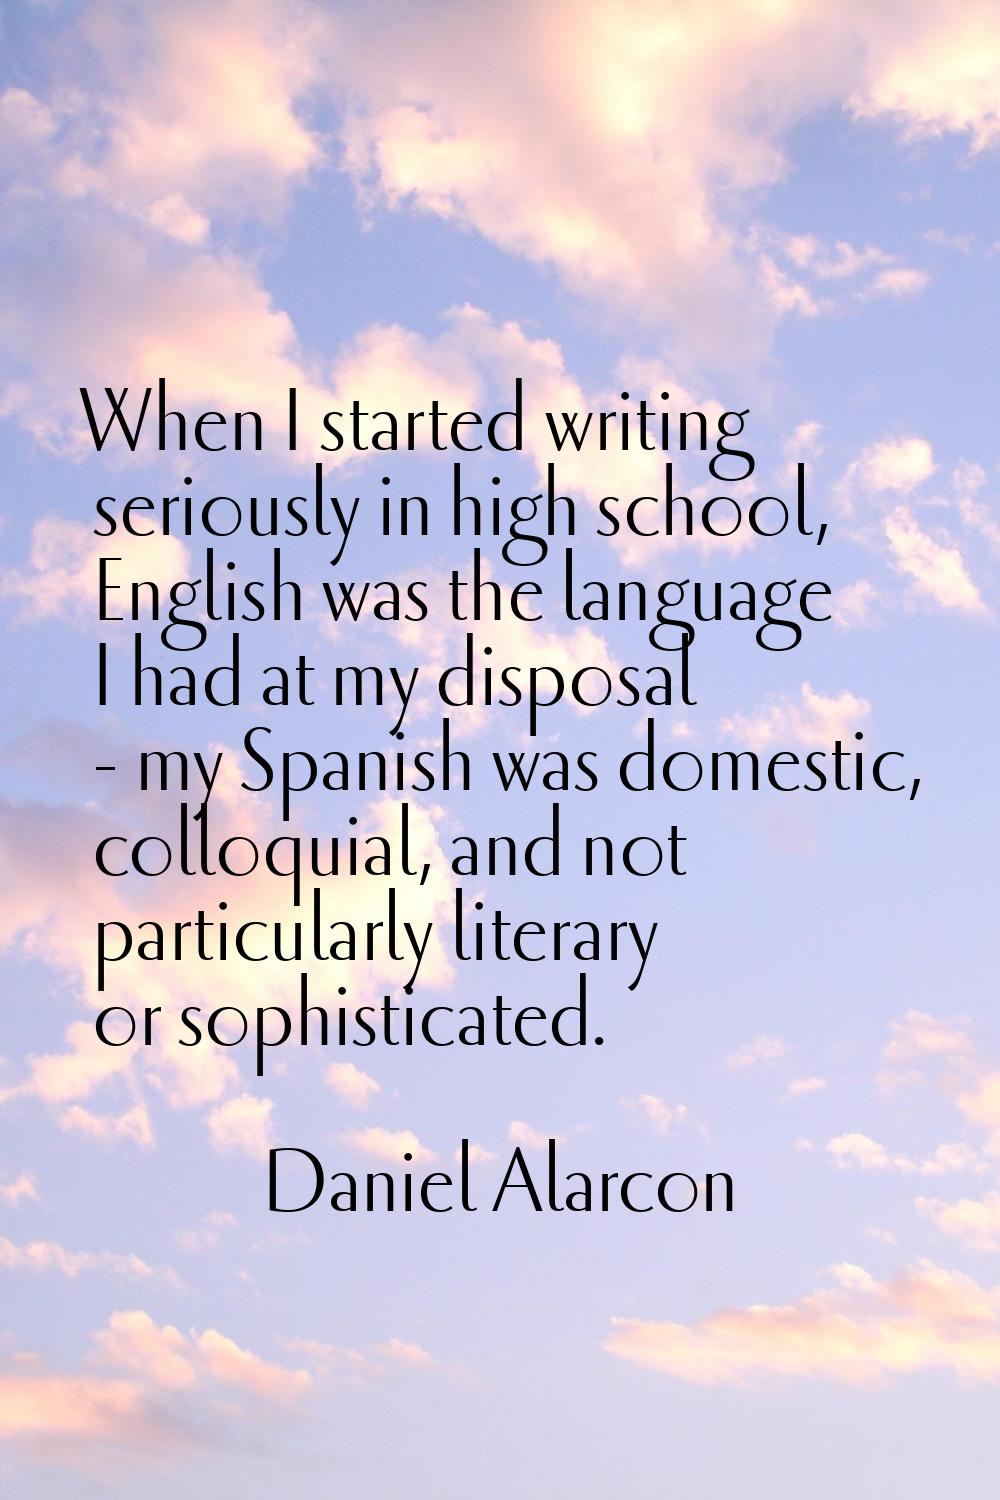 When I started writing seriously in high school, English was the language I had at my disposal - my